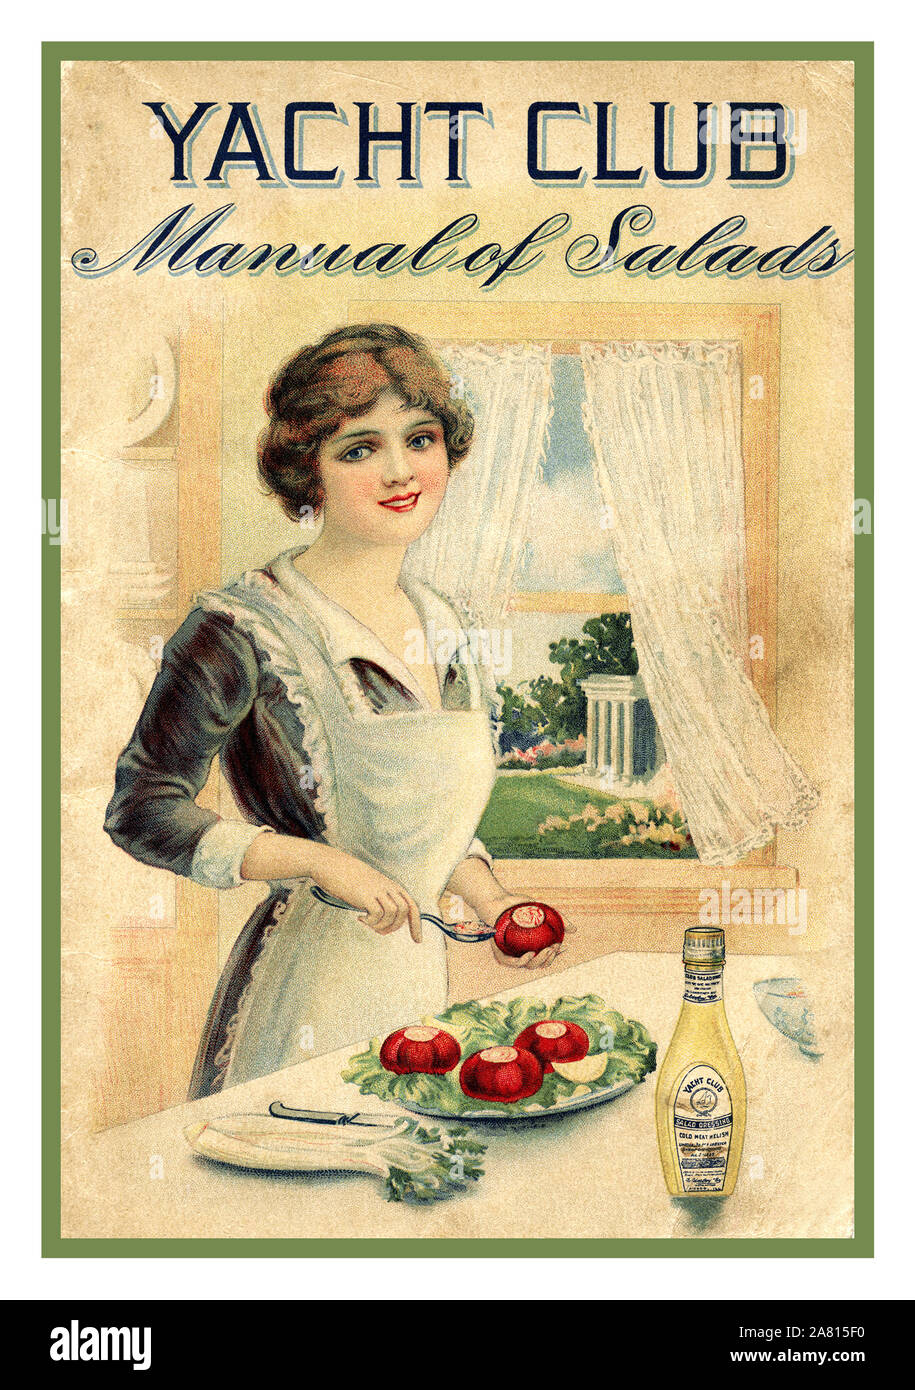 Vintage American USA 1900's YACHT CLUB branded food products front cover of a recipe booklet titled Manual of Salads features a woman in a blue dress and white apron preparing tomatoes for a salad. The booklet was published in 1914 to promote the use of Yacht Club food products. Book of Practical Suggestions for the Use of Yacht Club Food Products” by Agnes Carroll Hayward, Published by Tildesley & Co. 1914 Stock Photo